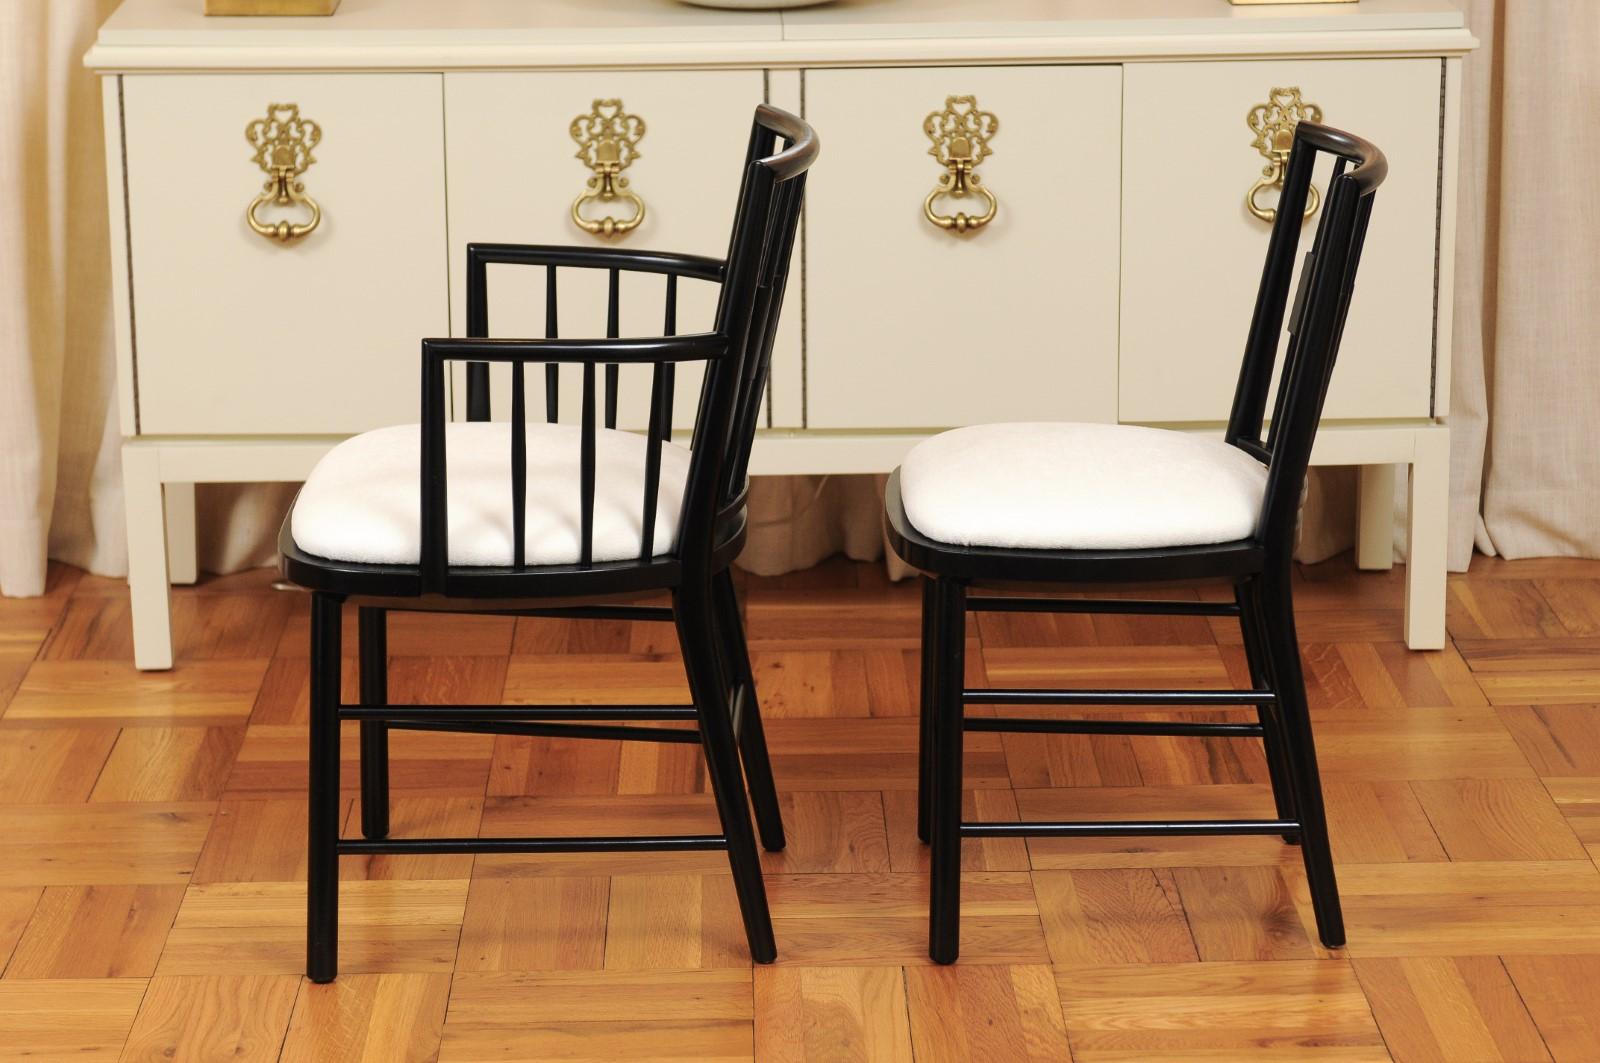  Stellar Set of 12 Modern Windsor Chairs by Michael Taylor, circa 1960 For Sale 4